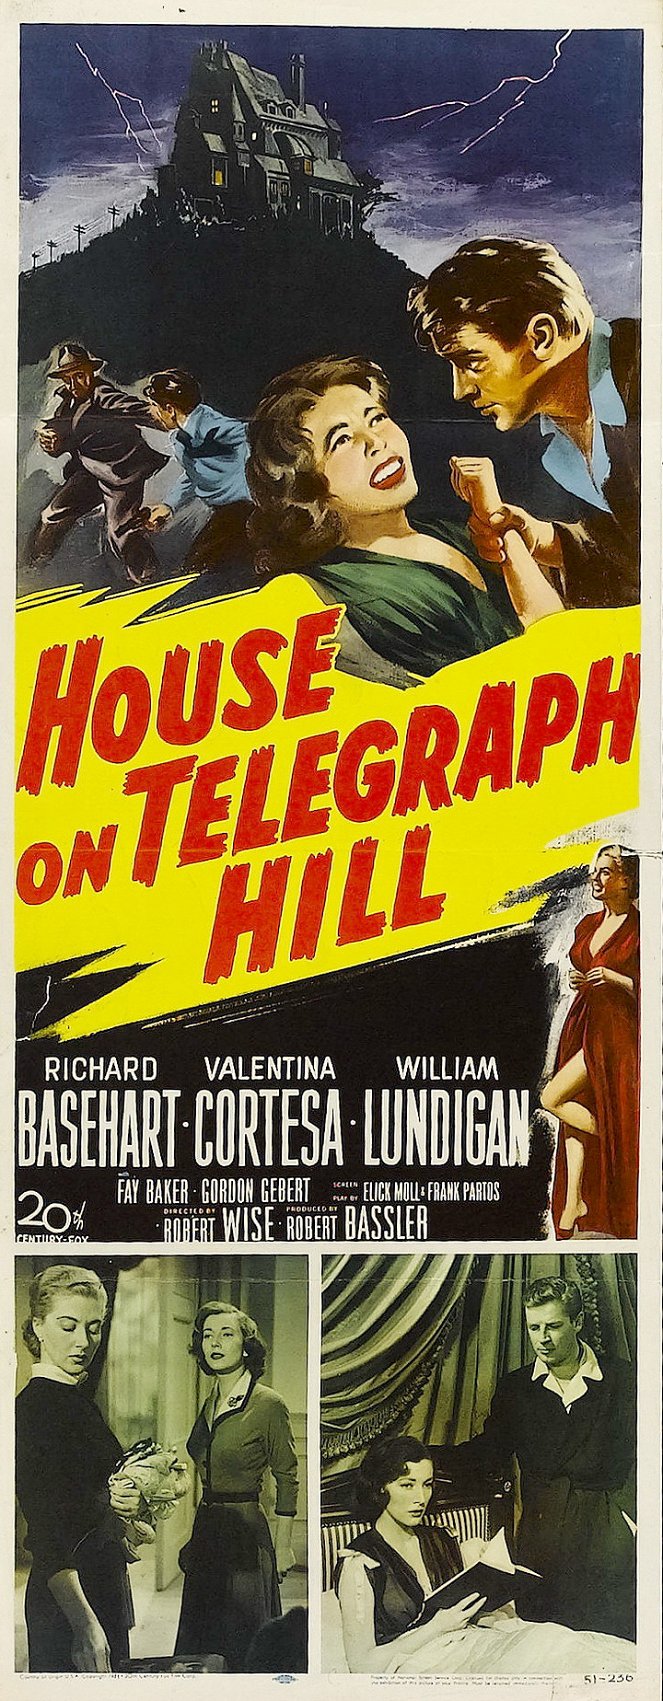 The House on Telegraph Hill - Posters